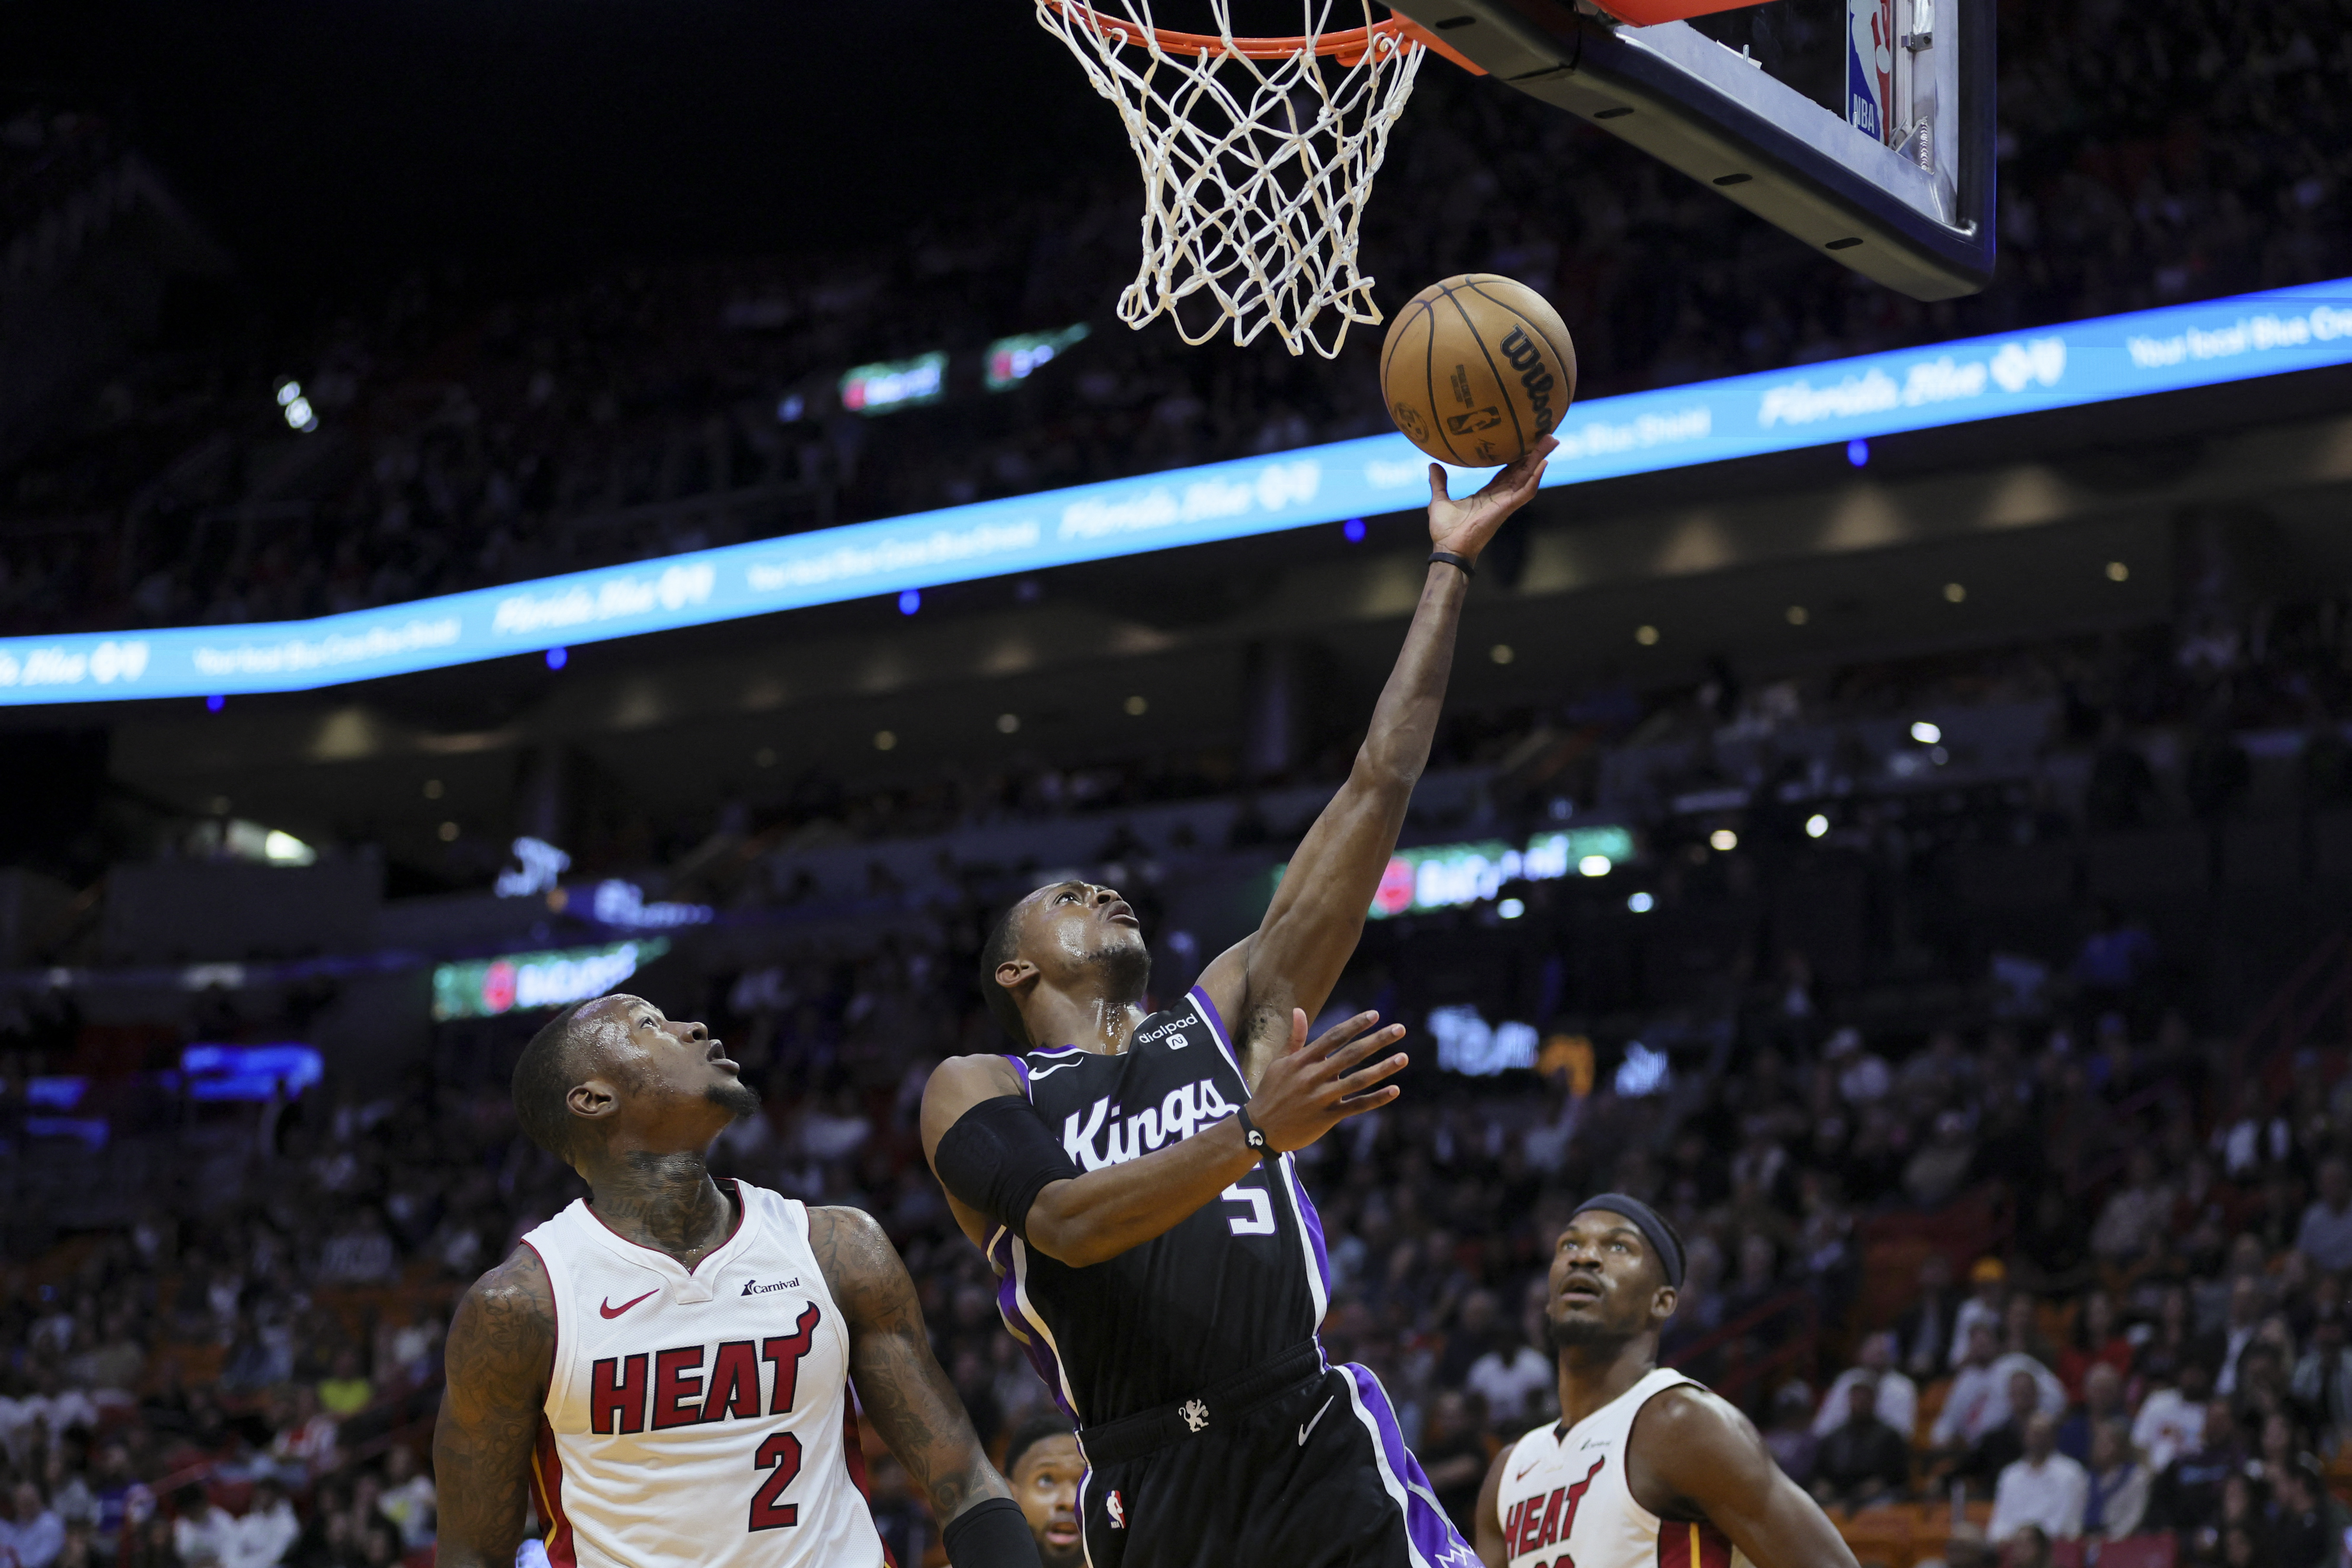 Did victory over Kings exemplify no-excuses Miami Heat?